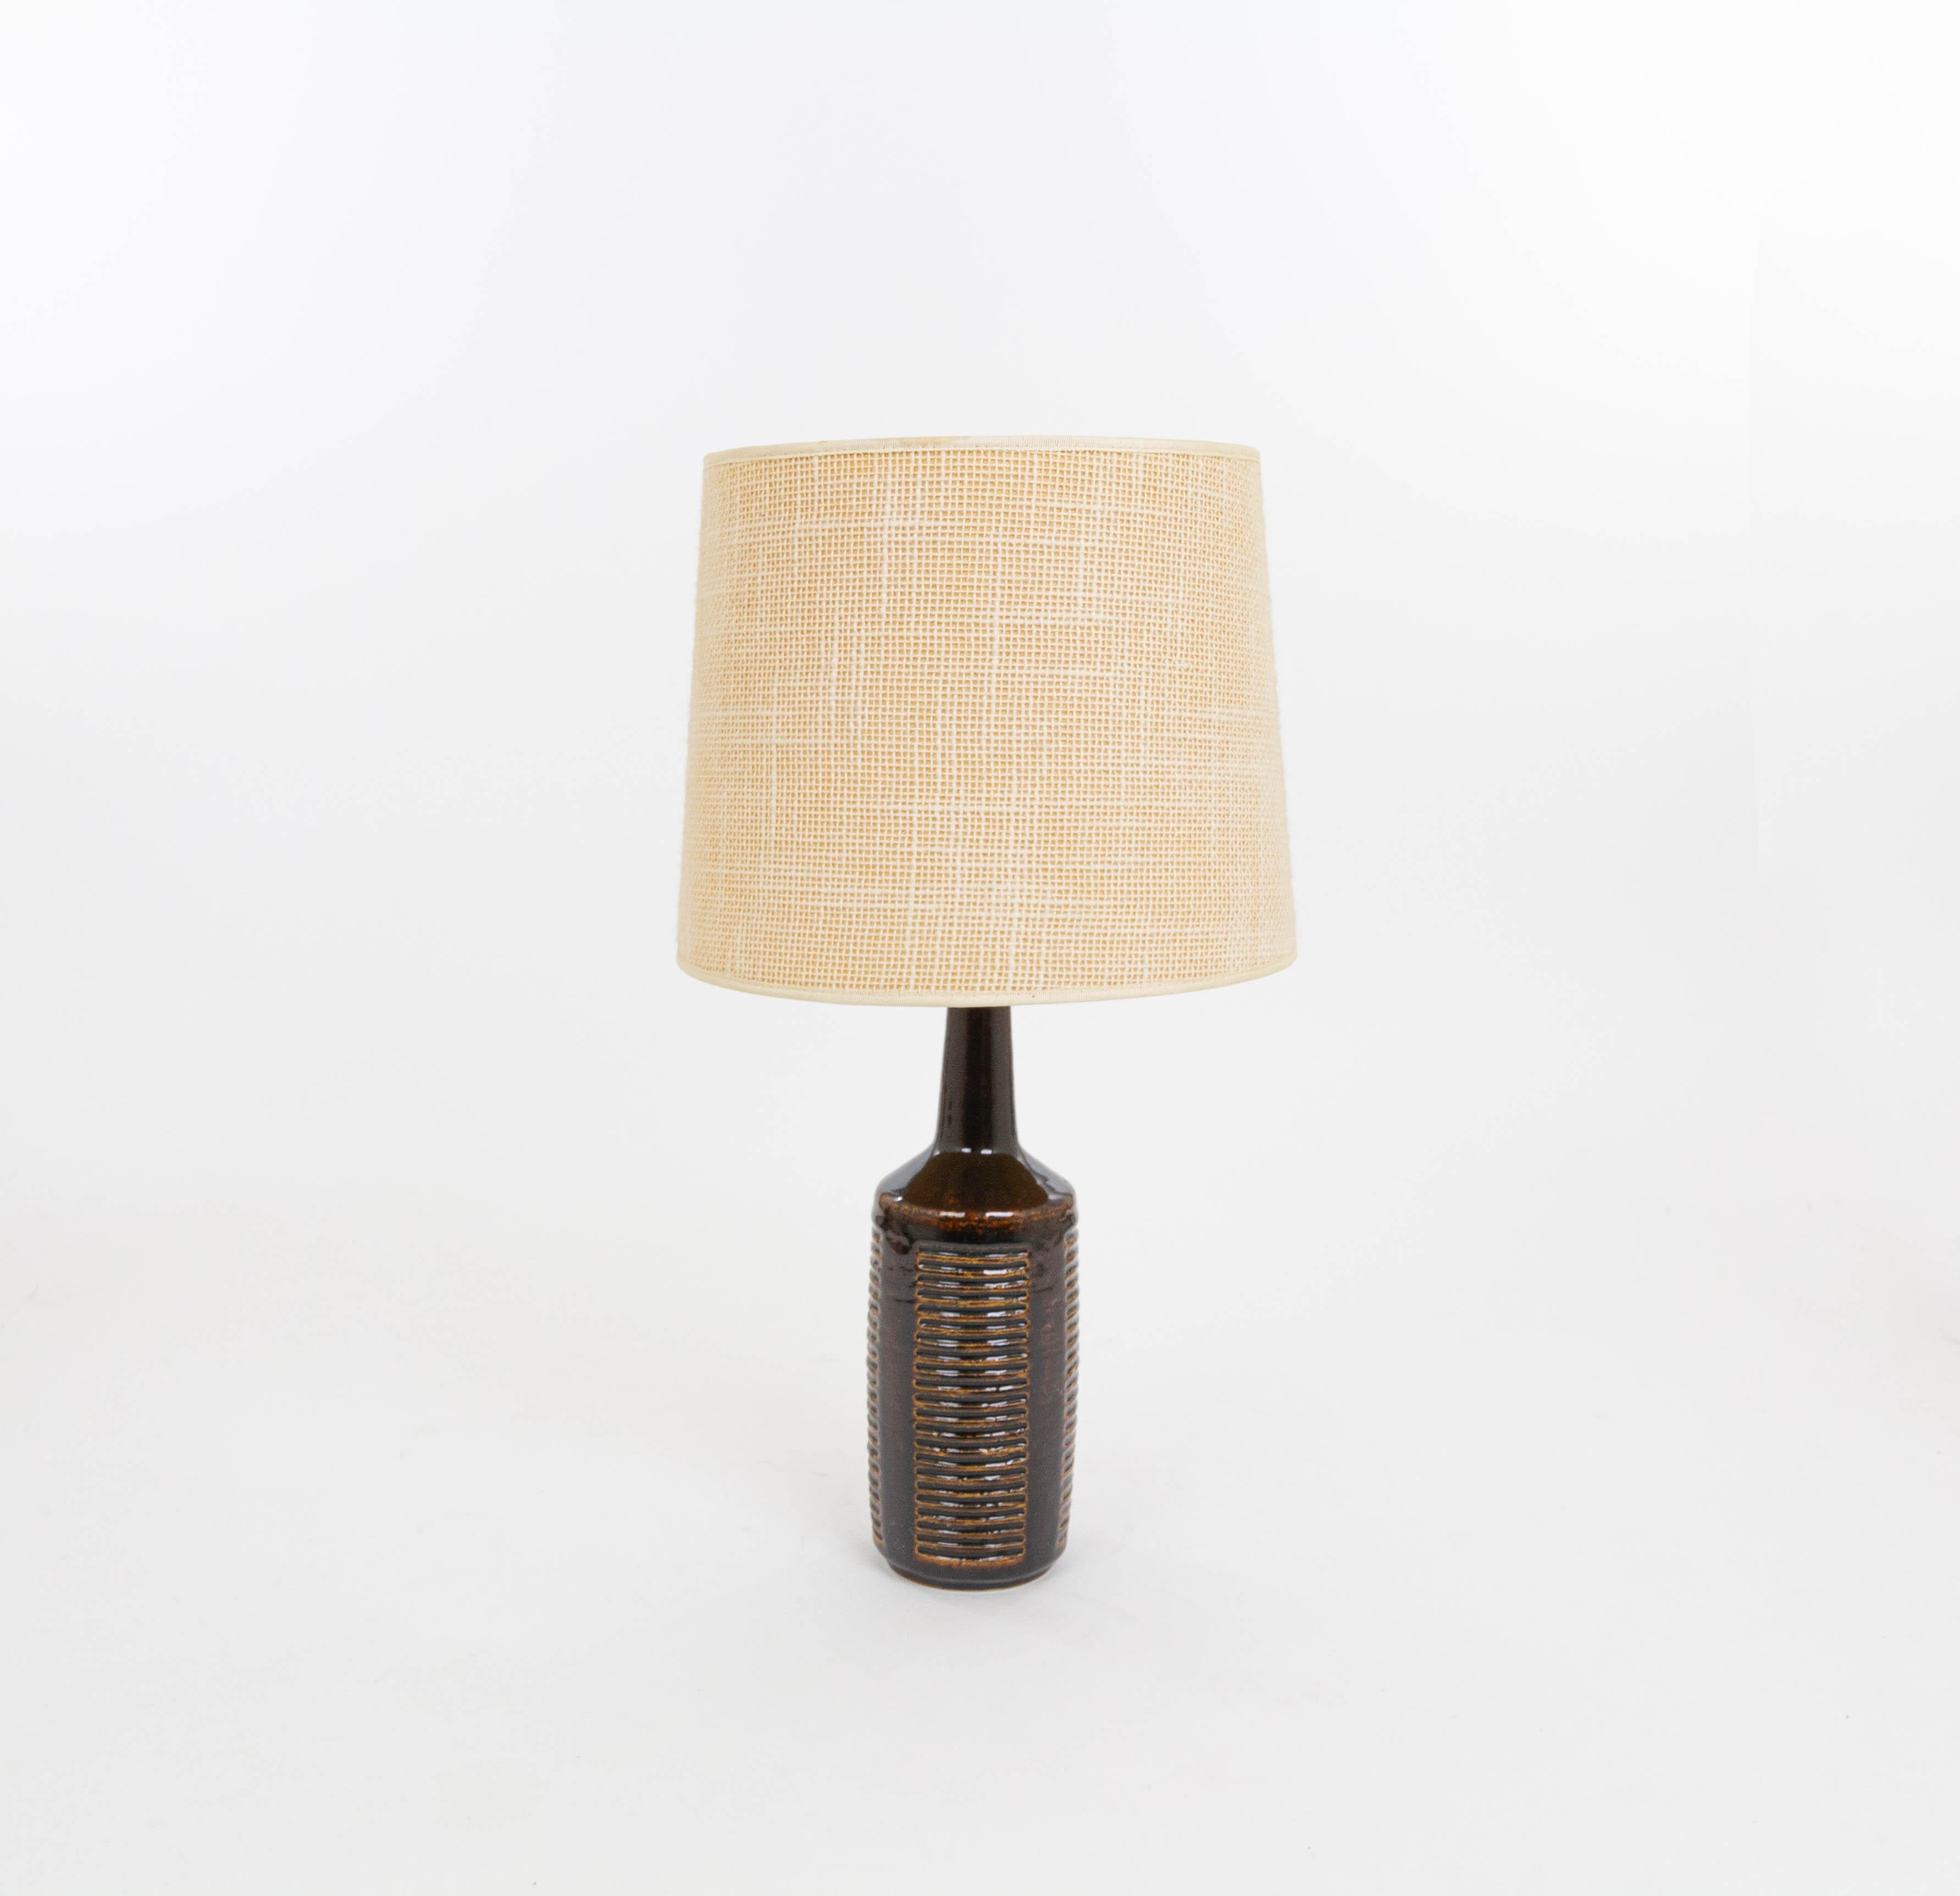 Model DL/30 table lamp made by Annelise and Per Linnemann-Schmidt for Palshus in the 1960s. The colour of the handmade decorated base is Dark Chocolate Brown. It has impressed, geometric patterns.

The lamp comes with its original lampshade holder.